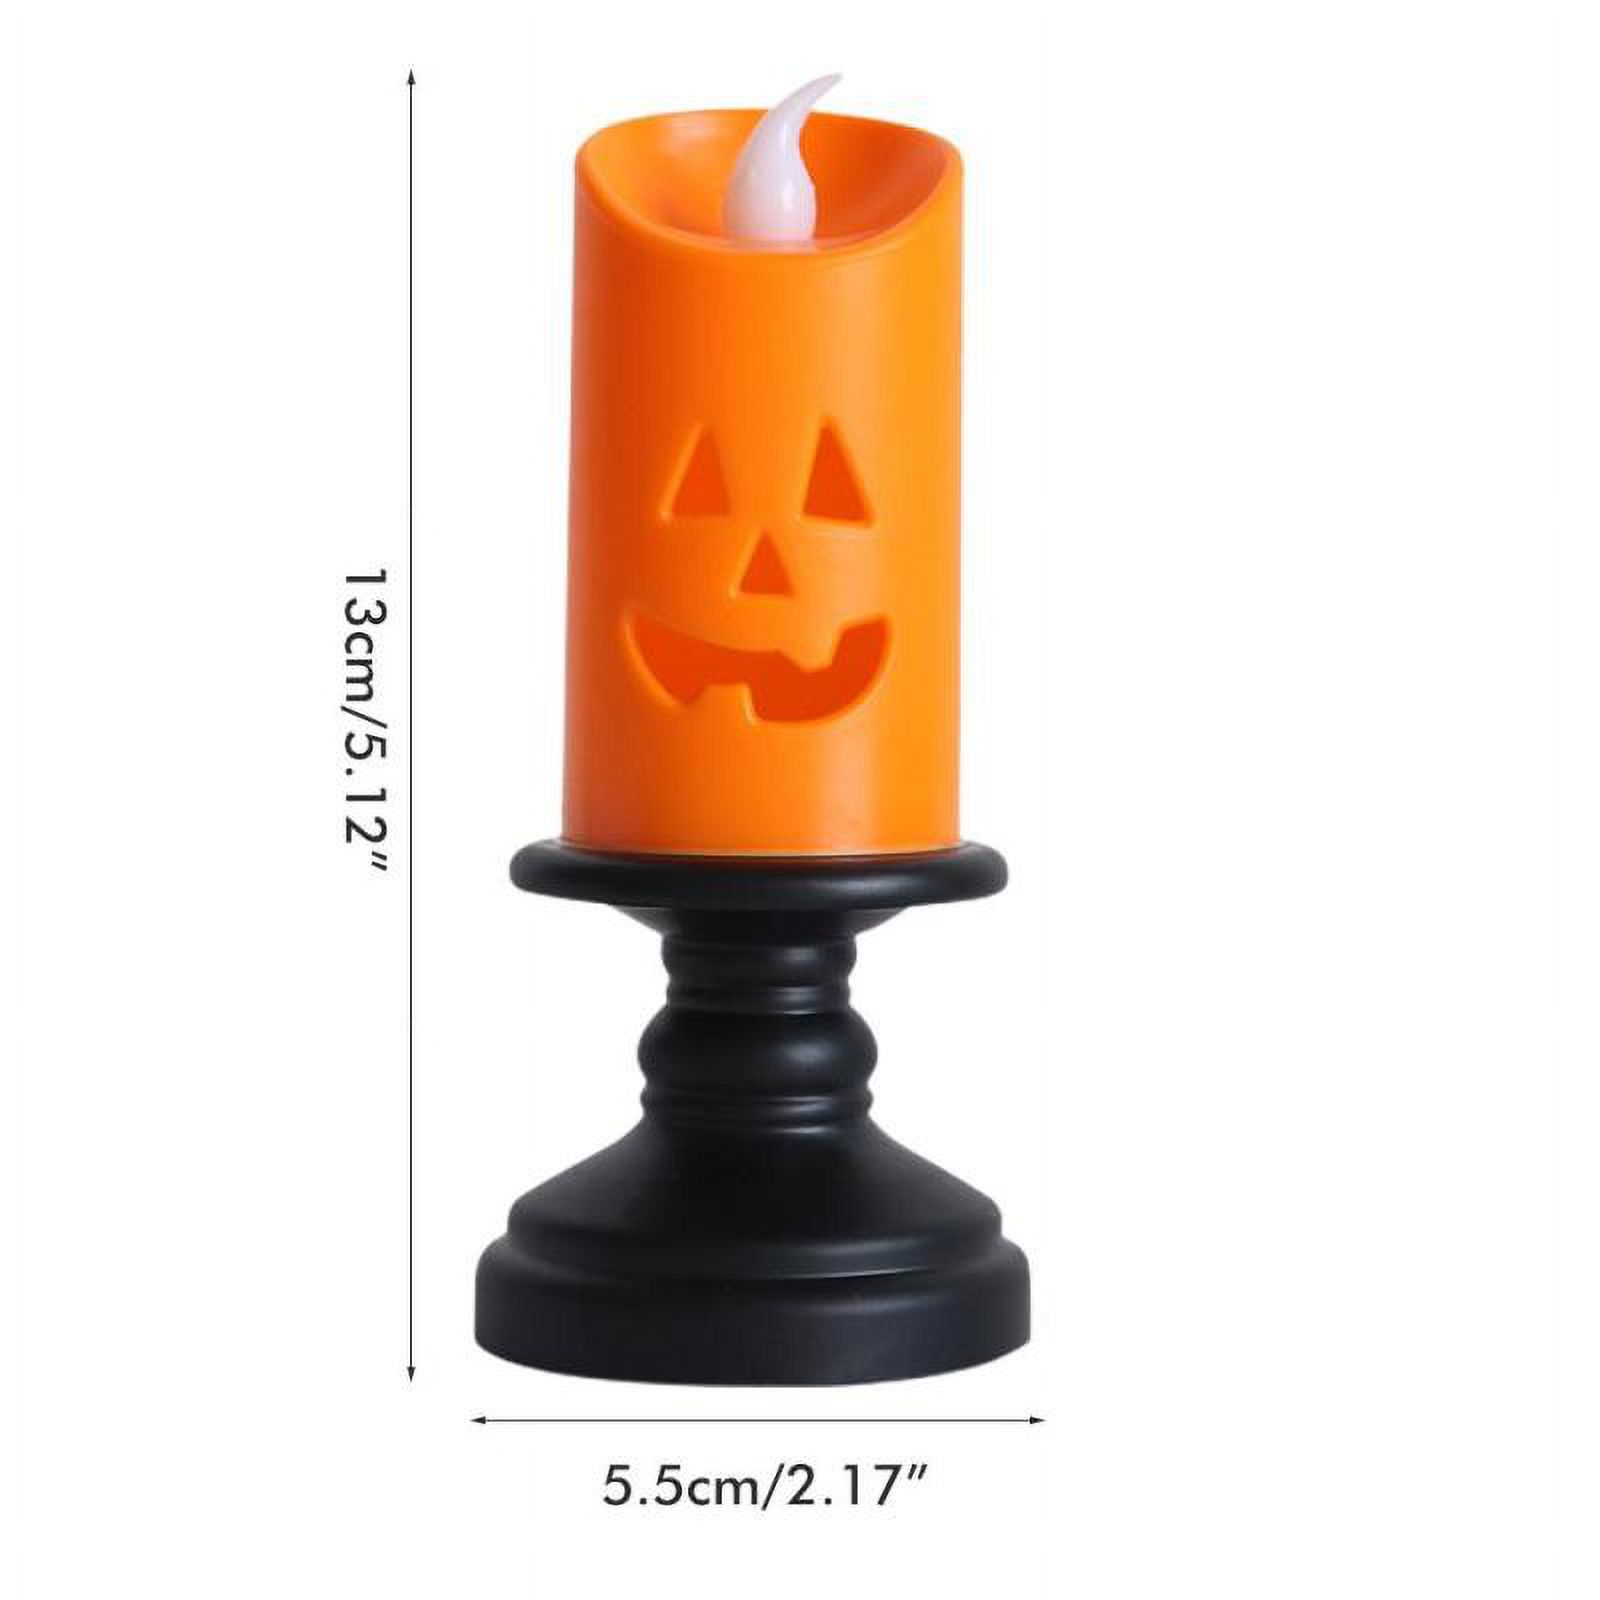 6 PACK Halloween Pumpkin Candle Light, Halloween Orange Flameless Candle Lights LED Lamps Festival Decor Light for Halloween Party - image 4 of 13